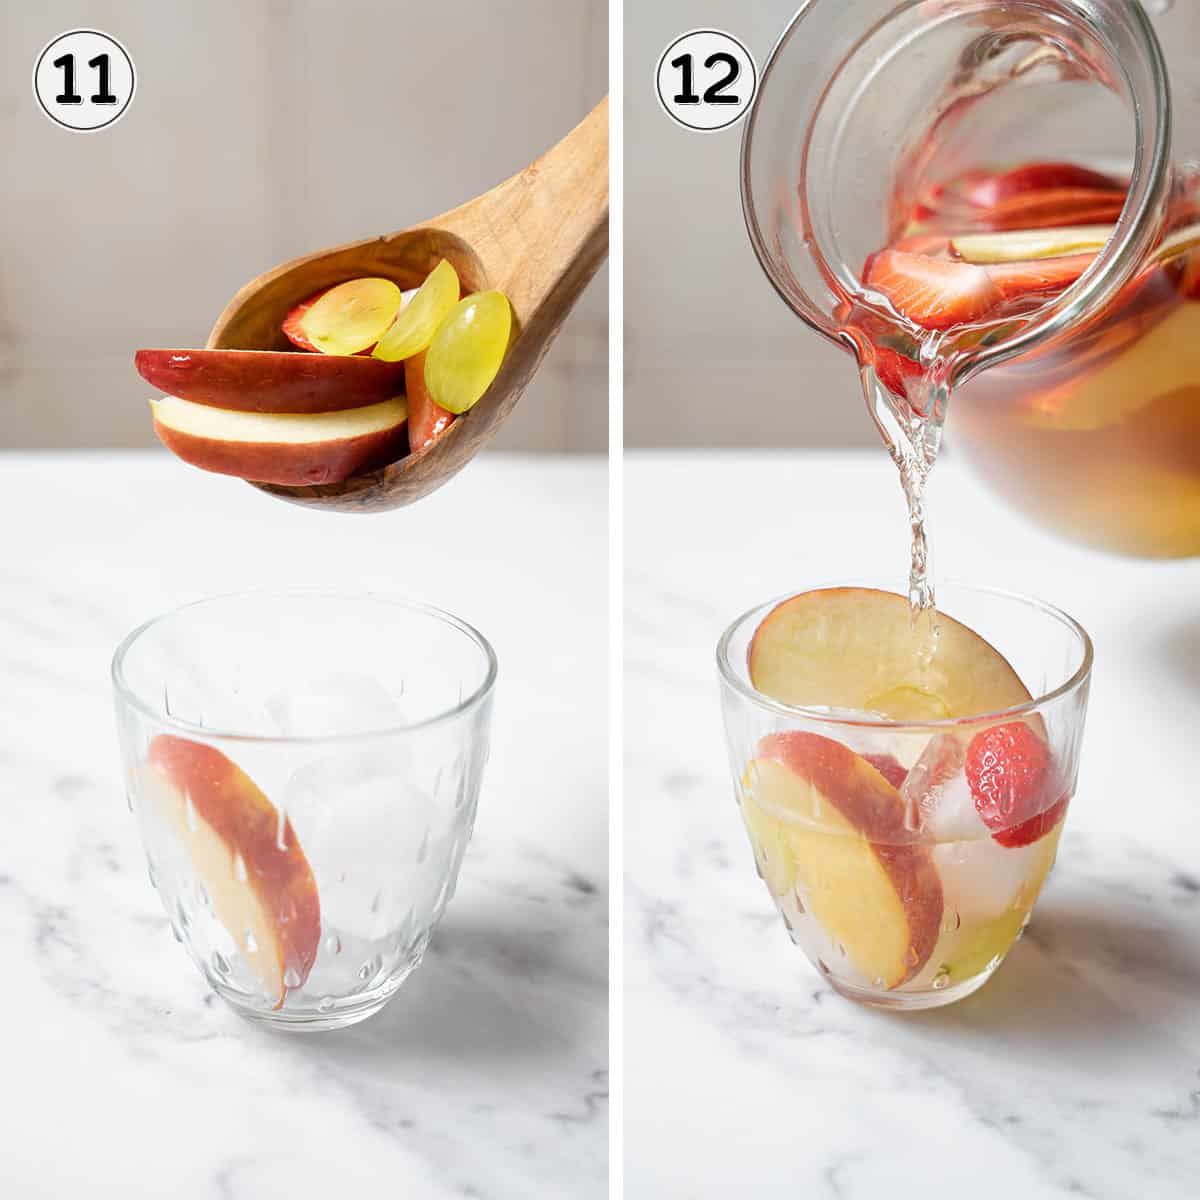 filling a glass with fruit and pouring the white sangria on top.